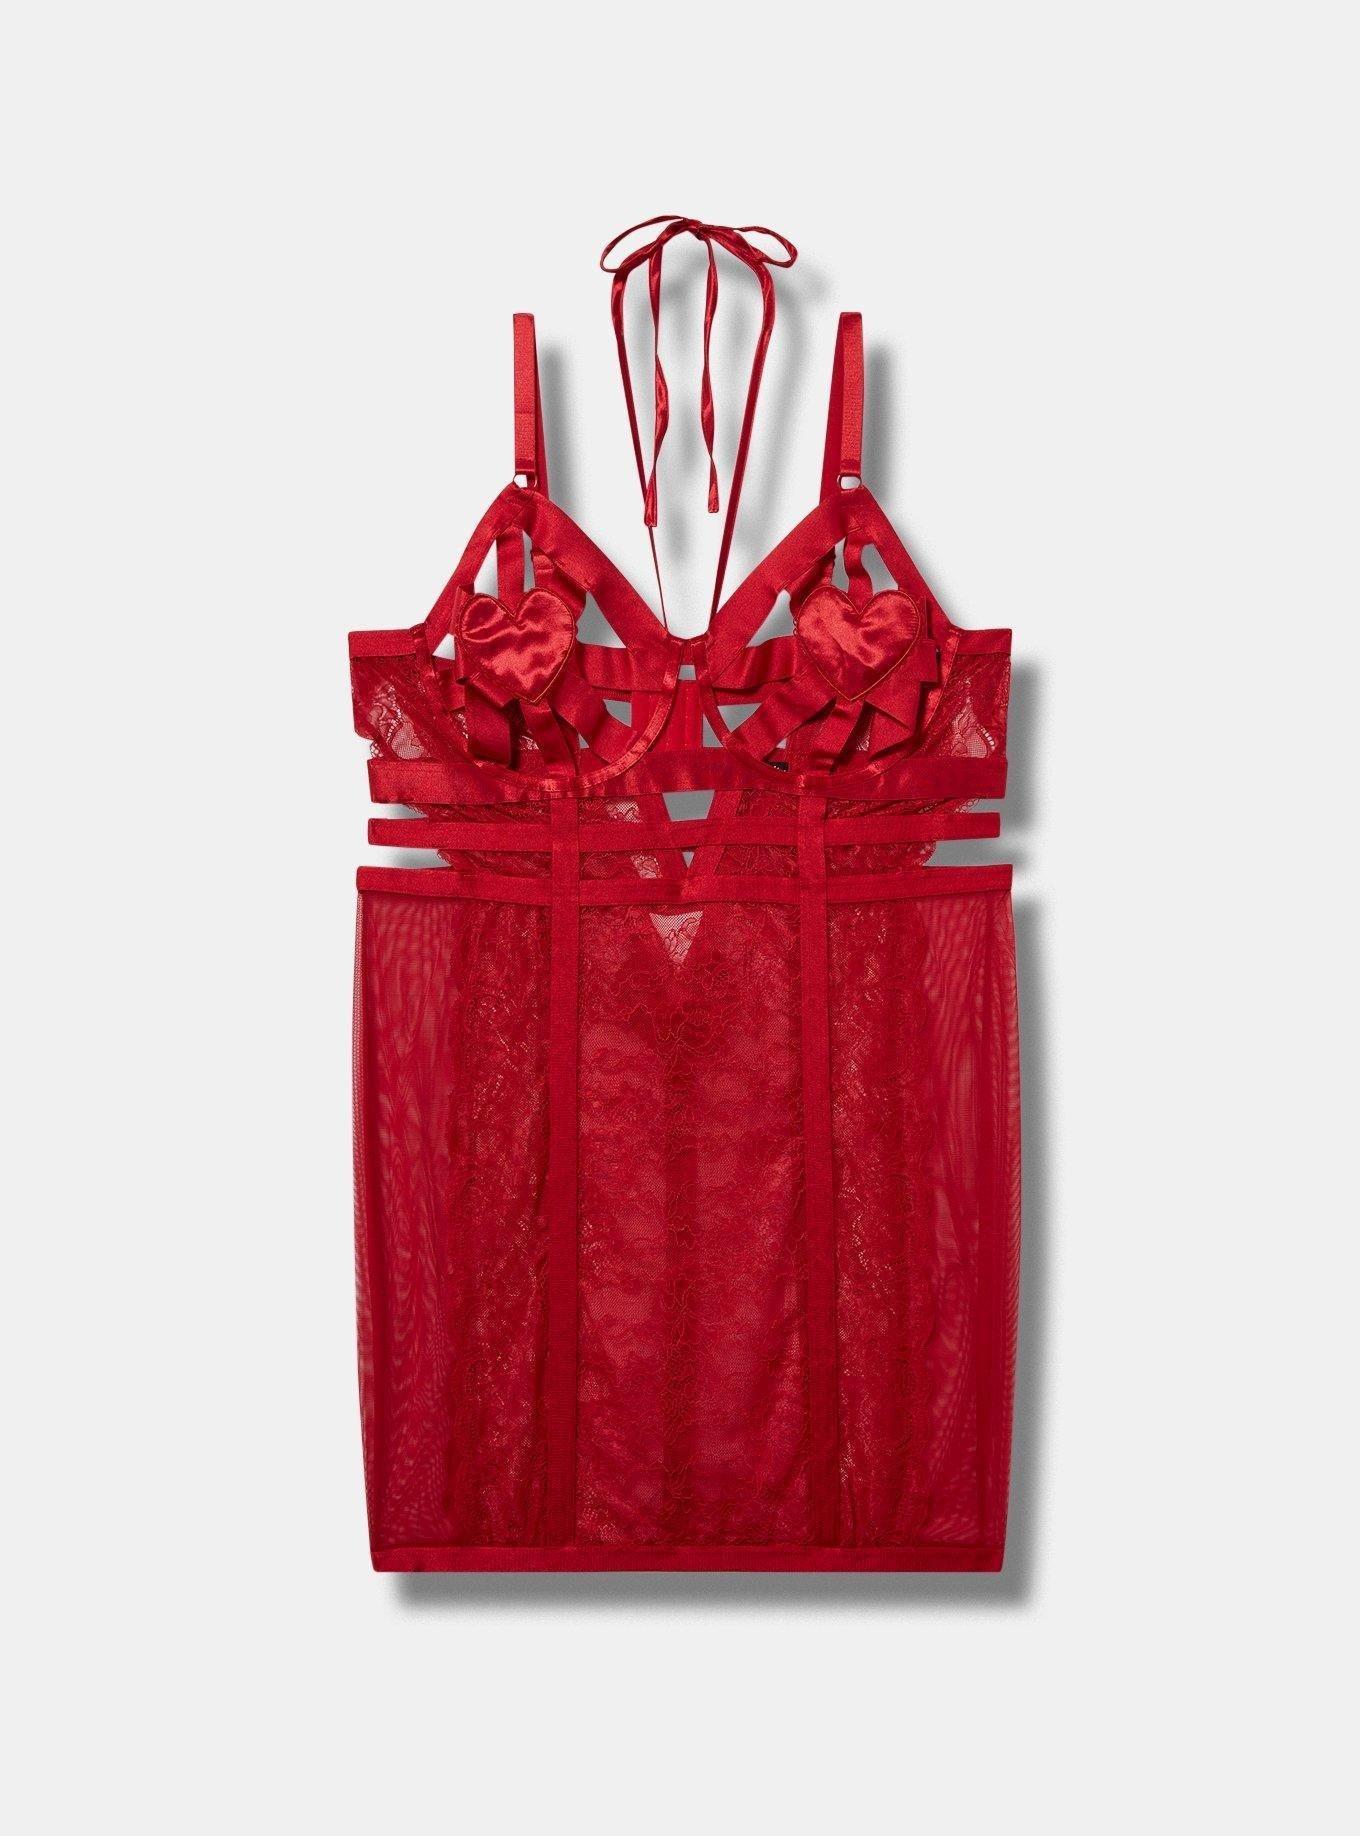 Strappy Heart Harness Top - Scarlet